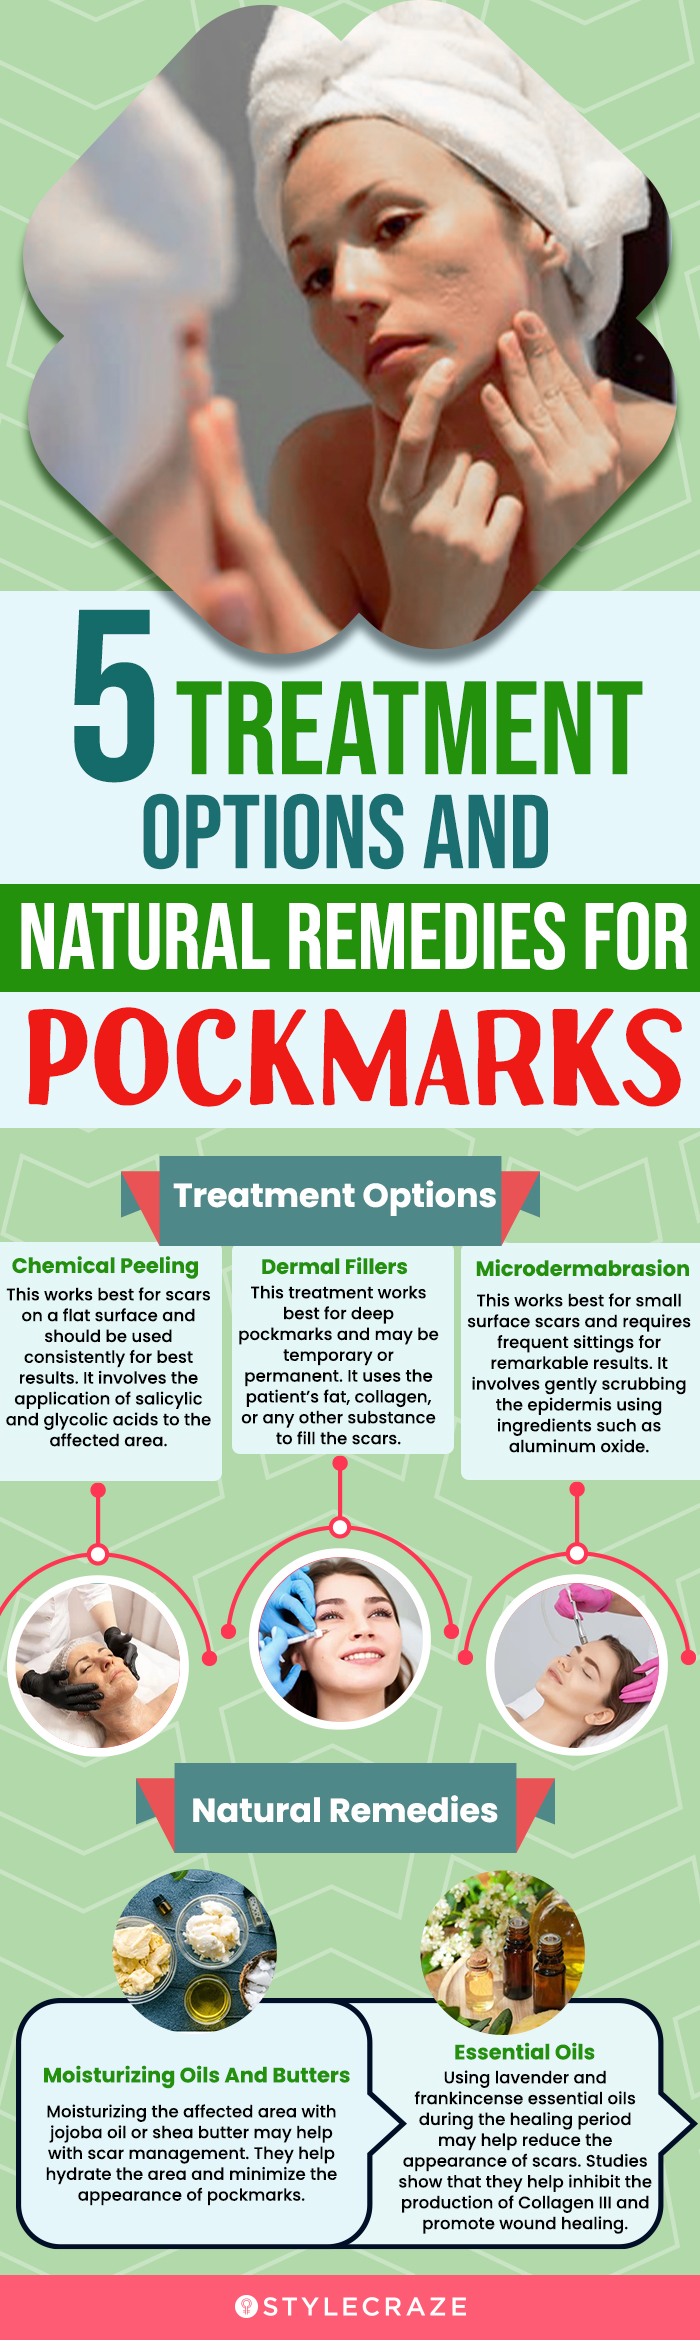 5 treatment options and natural remedies for pockmarks (infographic)